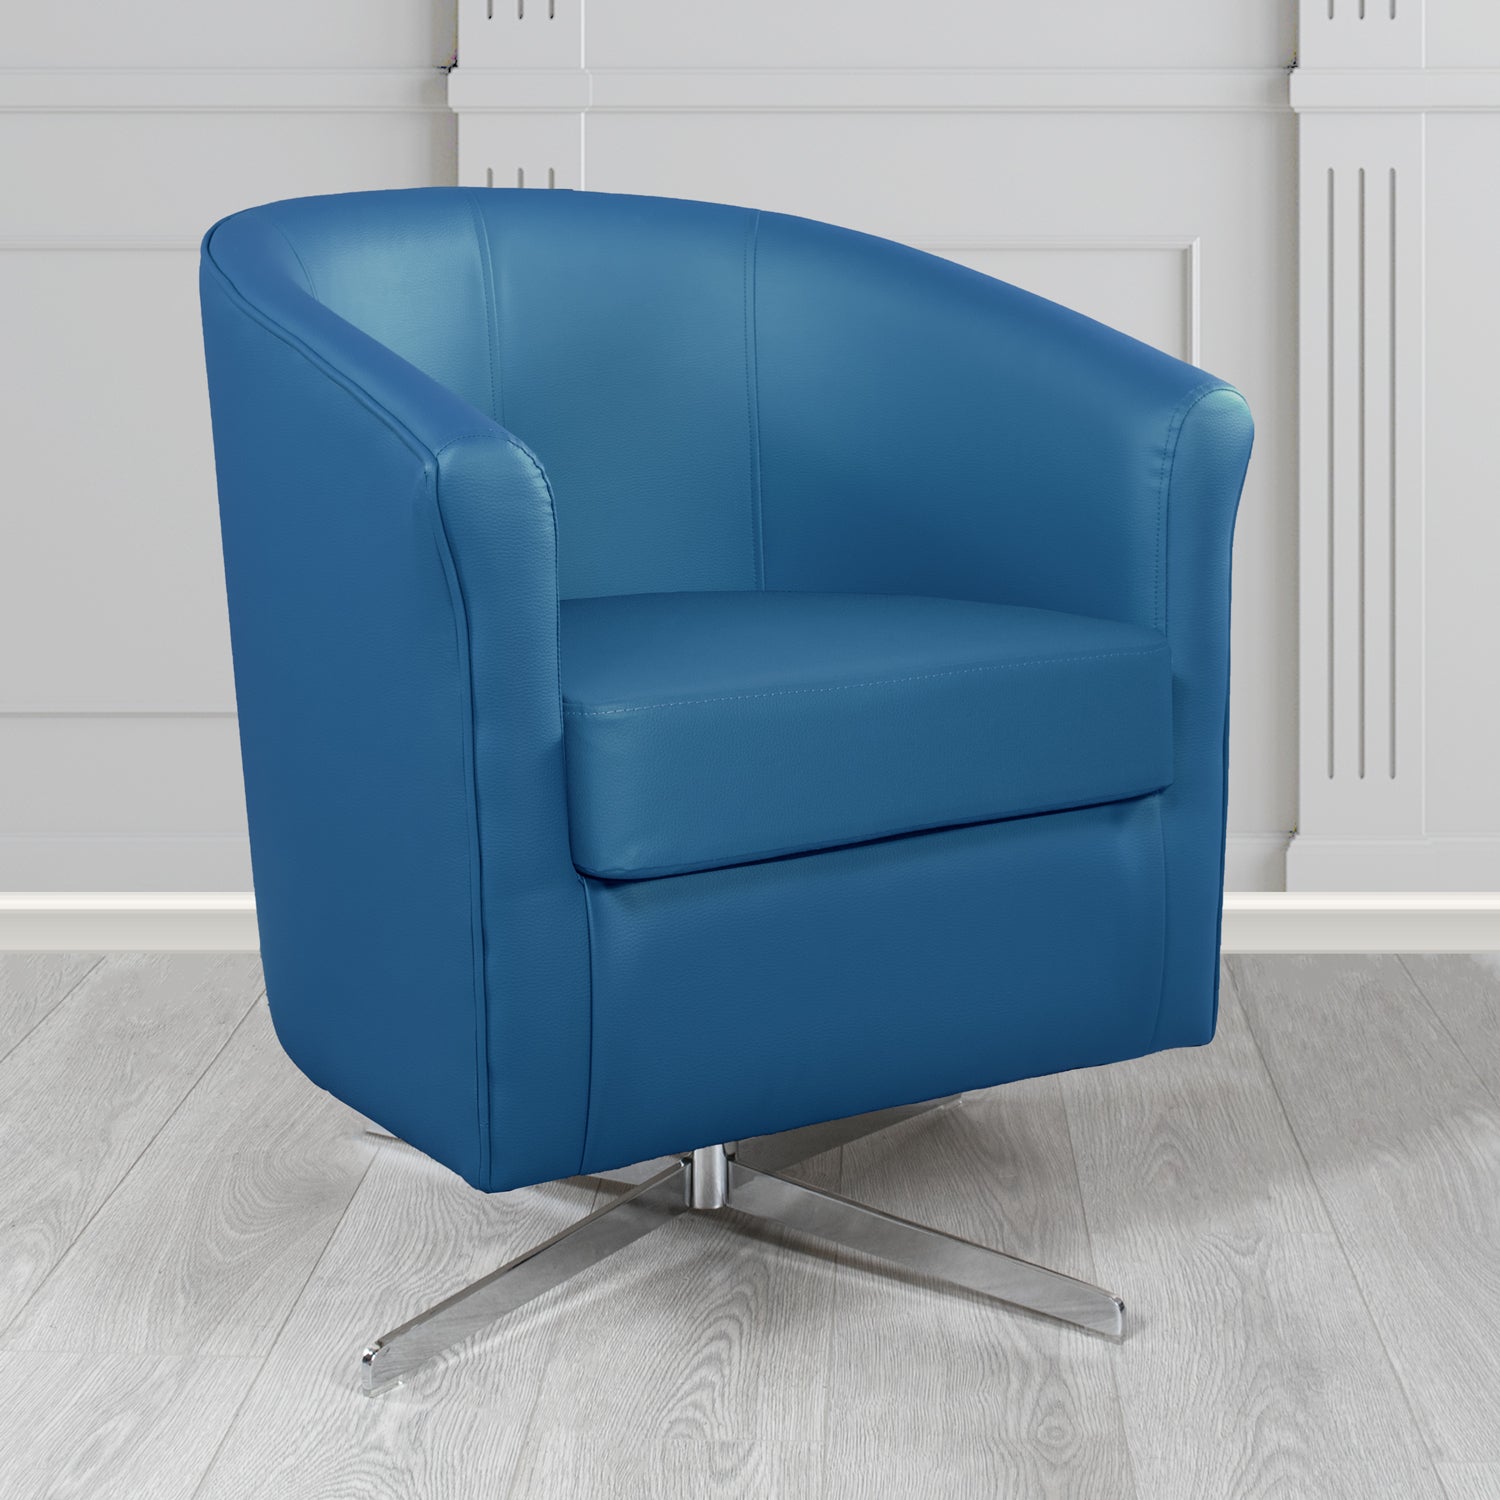 Cannes Swivel Tub Chair in Madrid Royal Faux Leather - The Tub Chair Shop